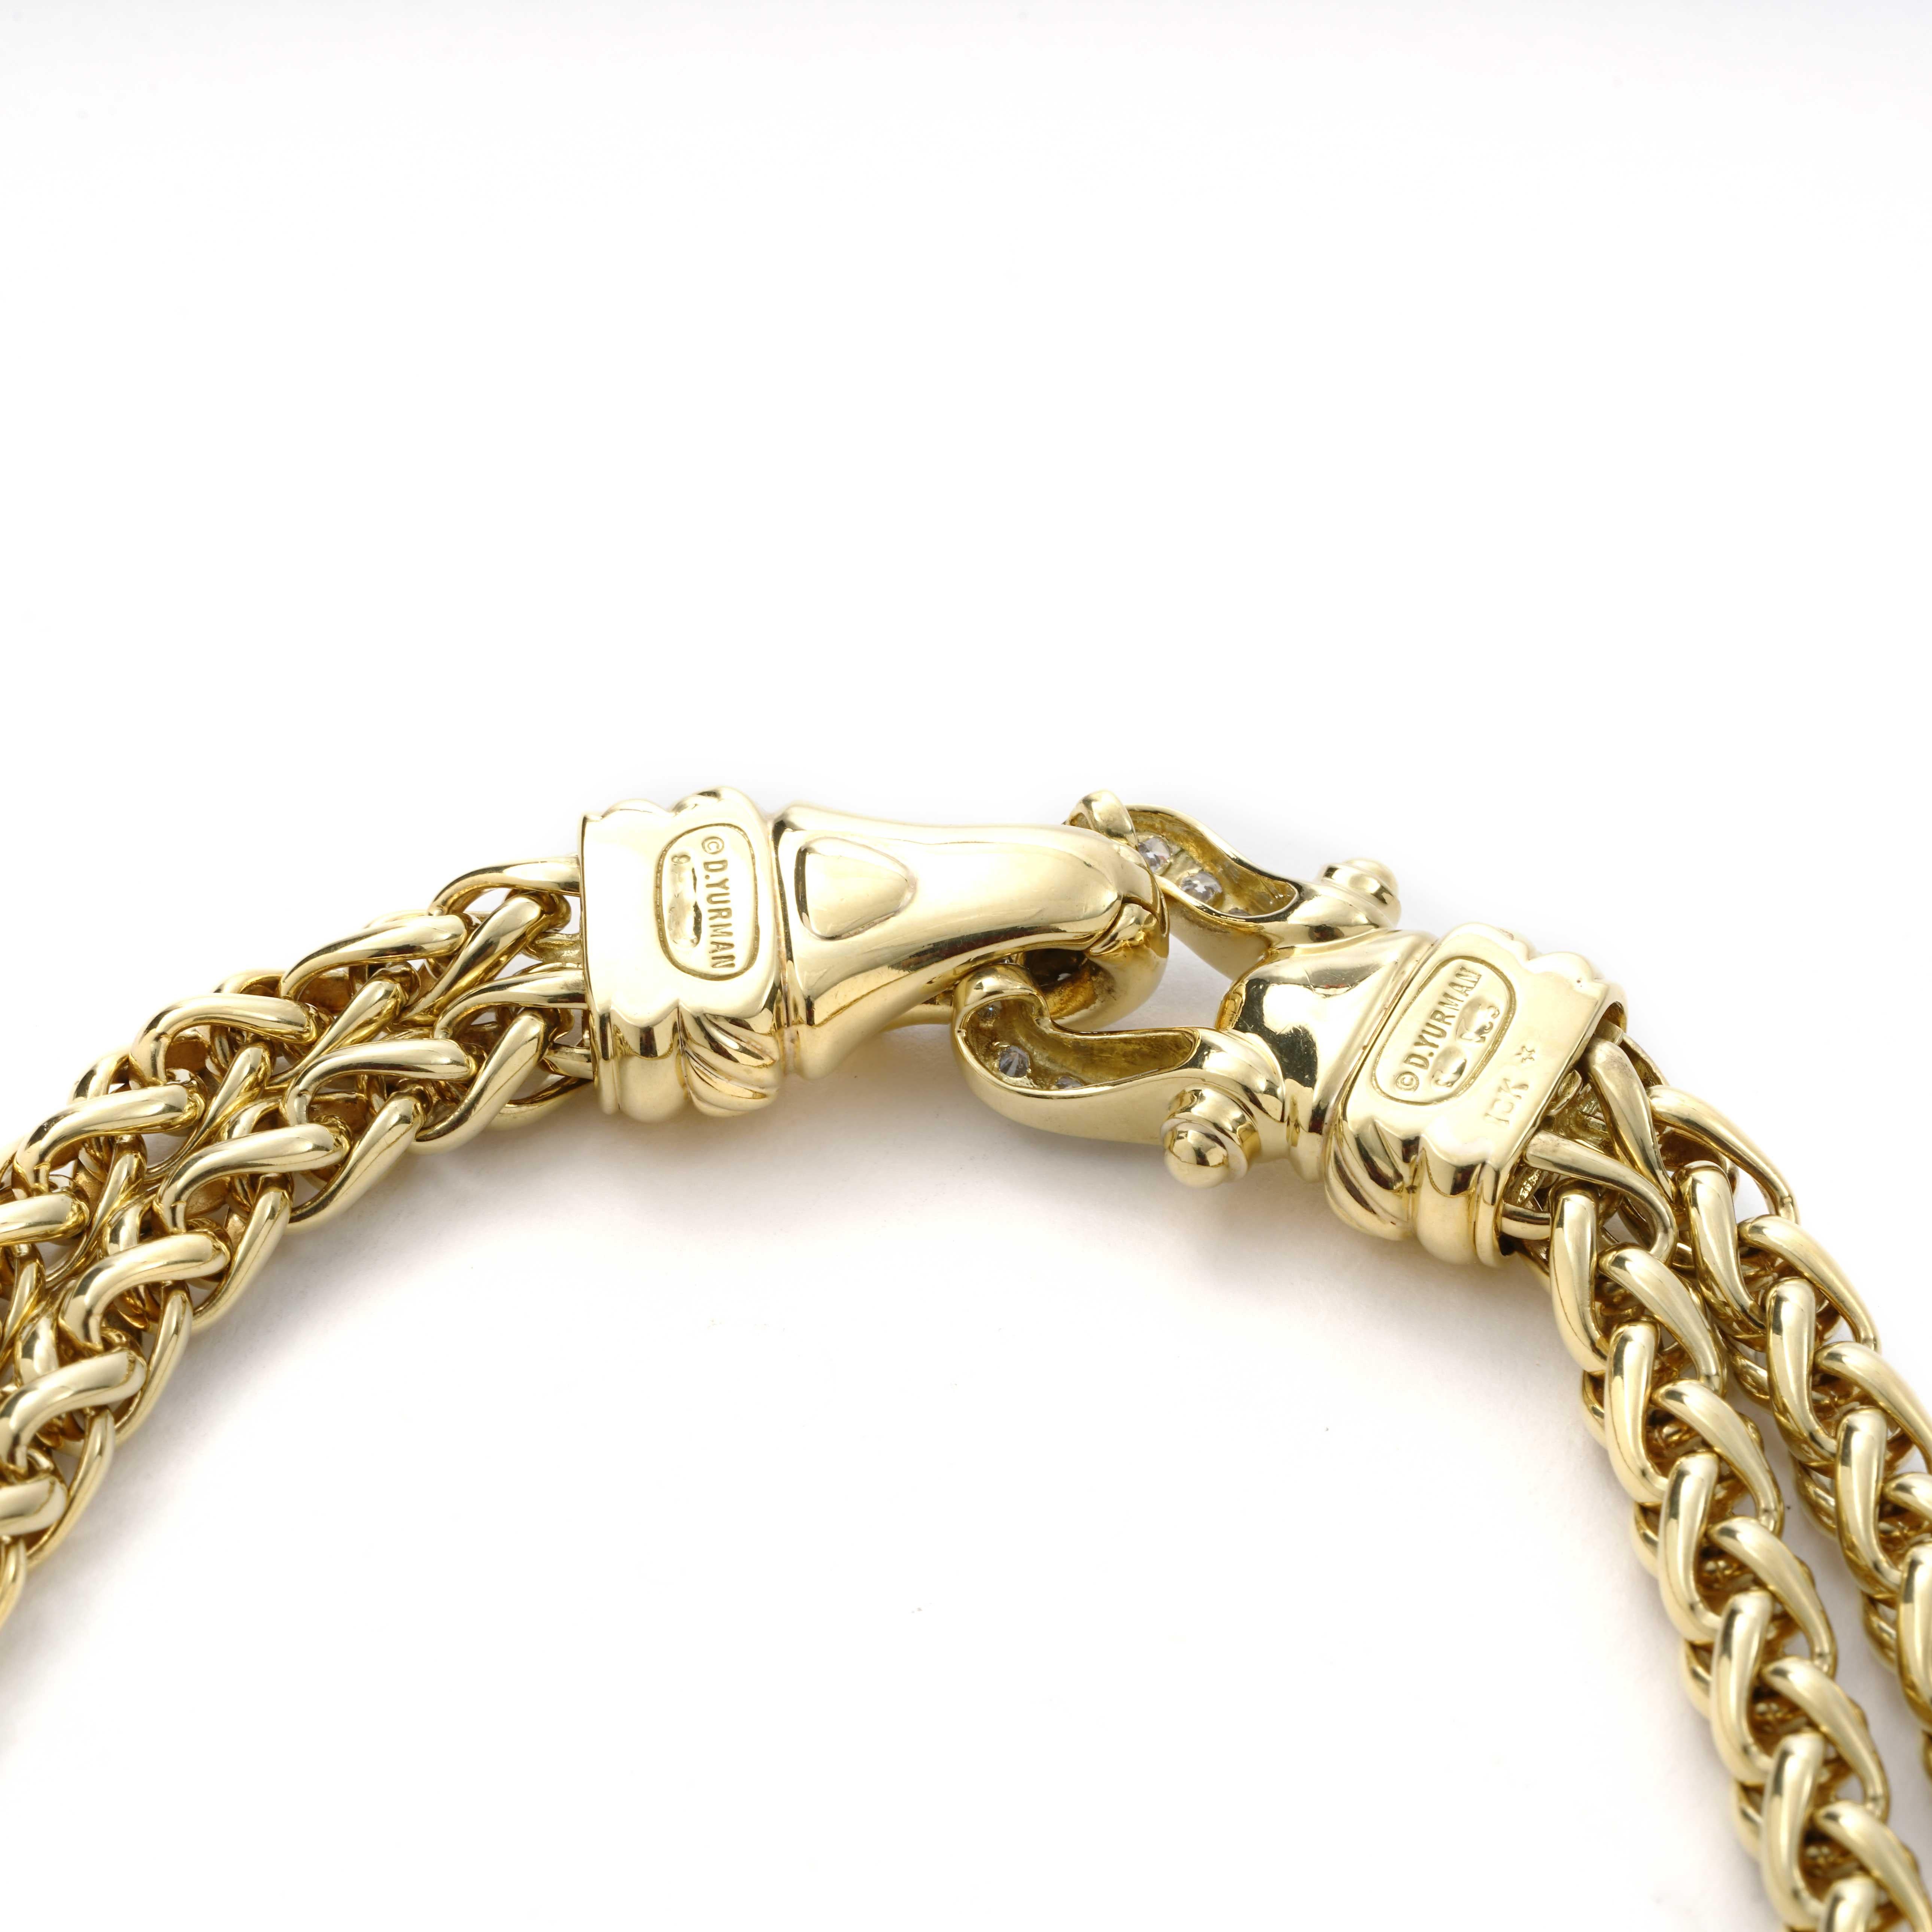 Retired, and previously owned David Yurman necklace. The necklace is 16 inches in length, made of 18K yellow gold. It also has 21 round F/G-color, VS-clarity diamonds weighing 1.10 CTTW.